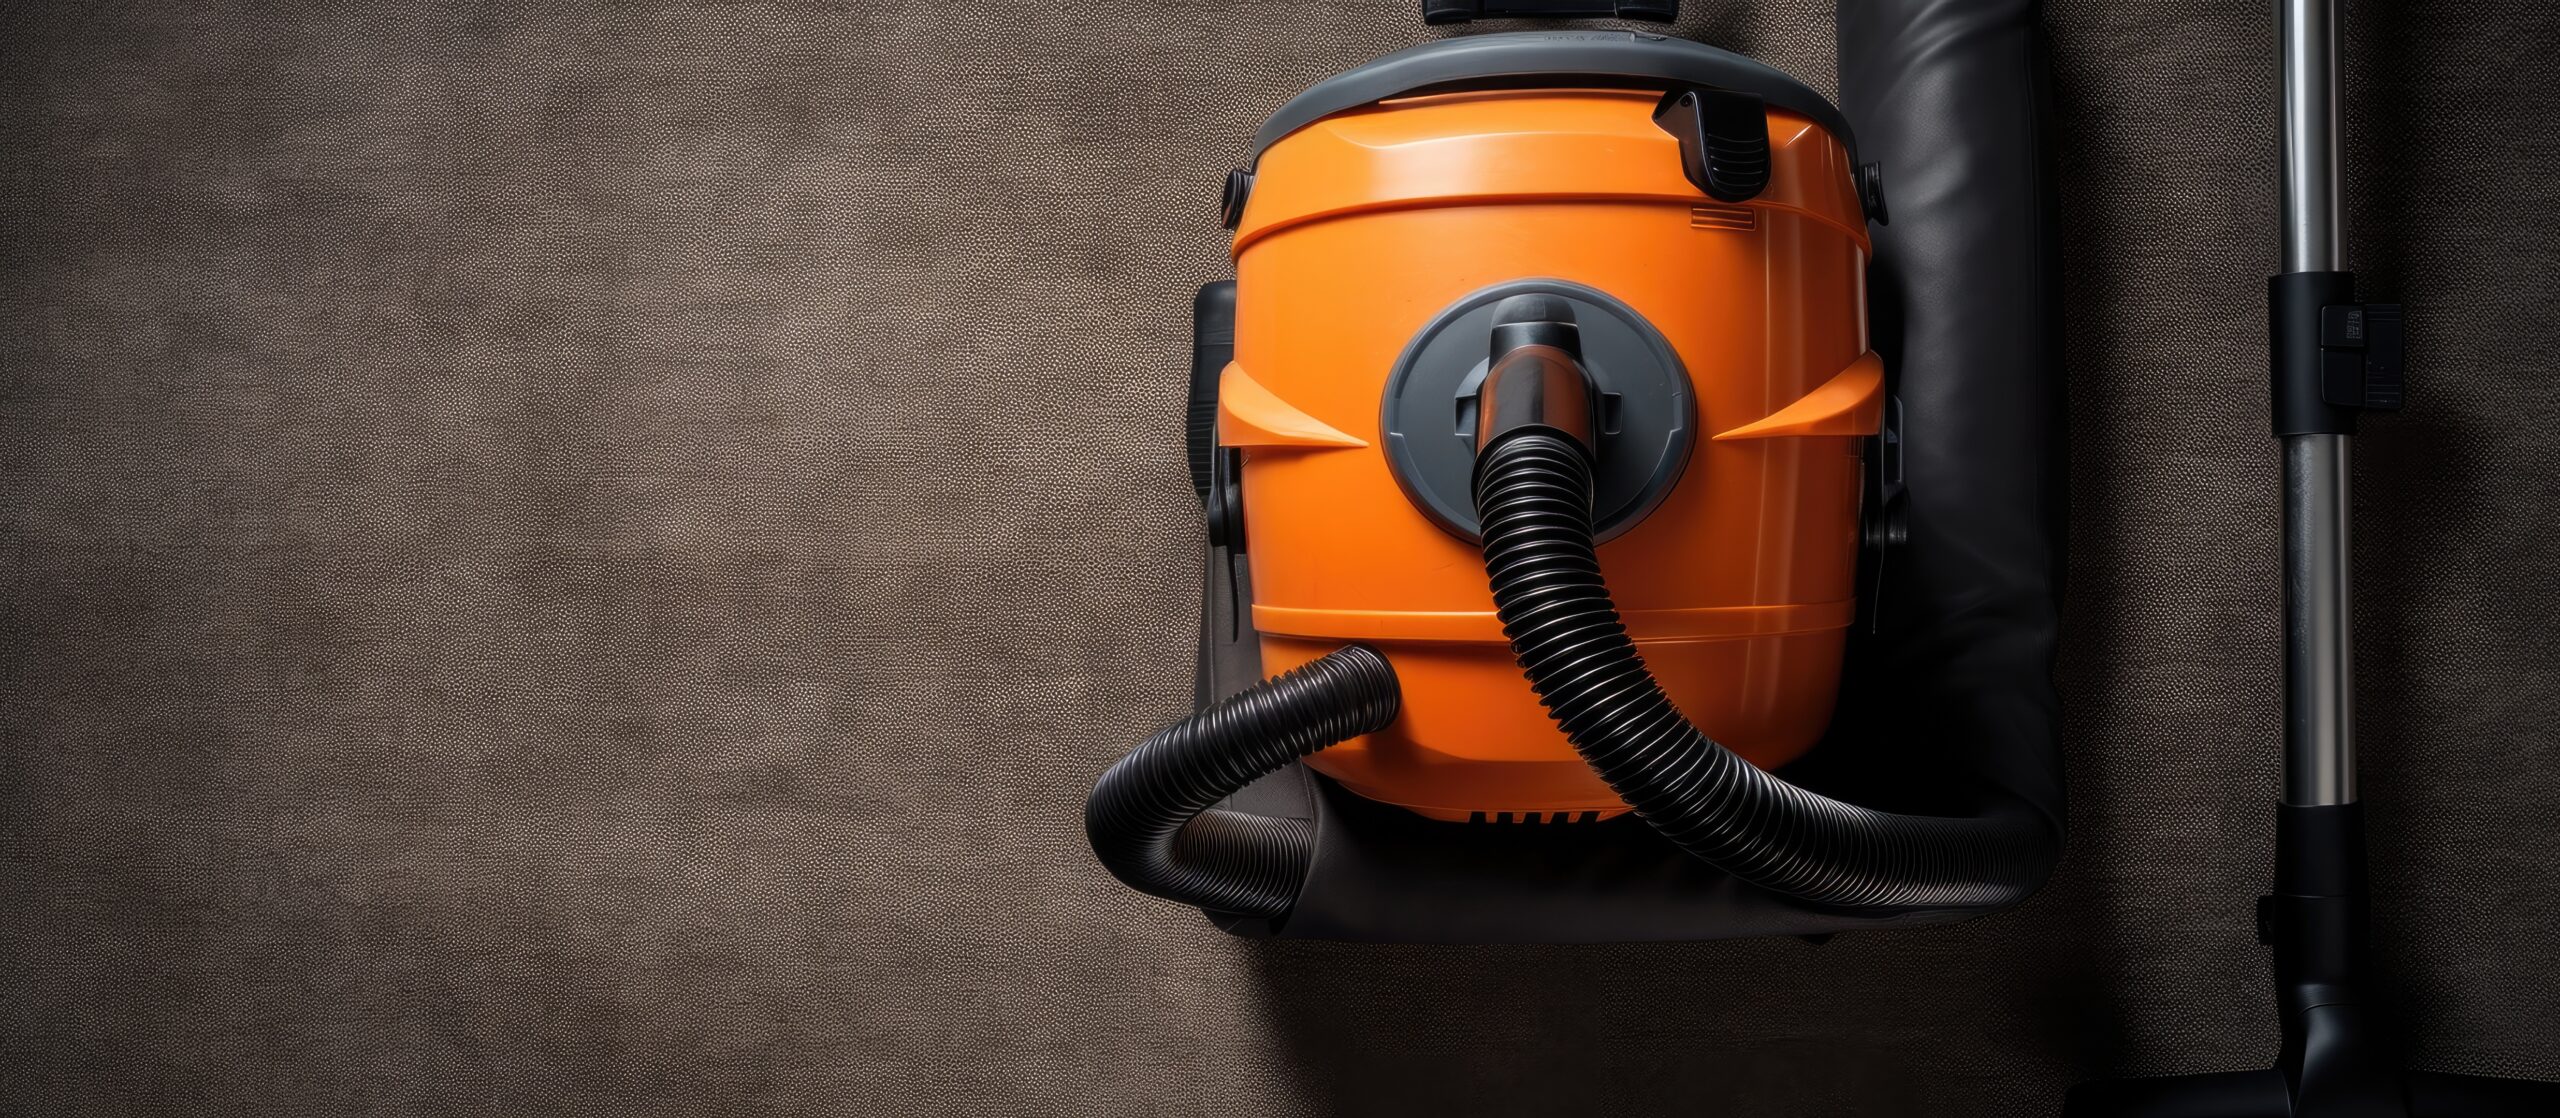 www.appr.com : Why is my shop vac blowing instead of vacuuming?